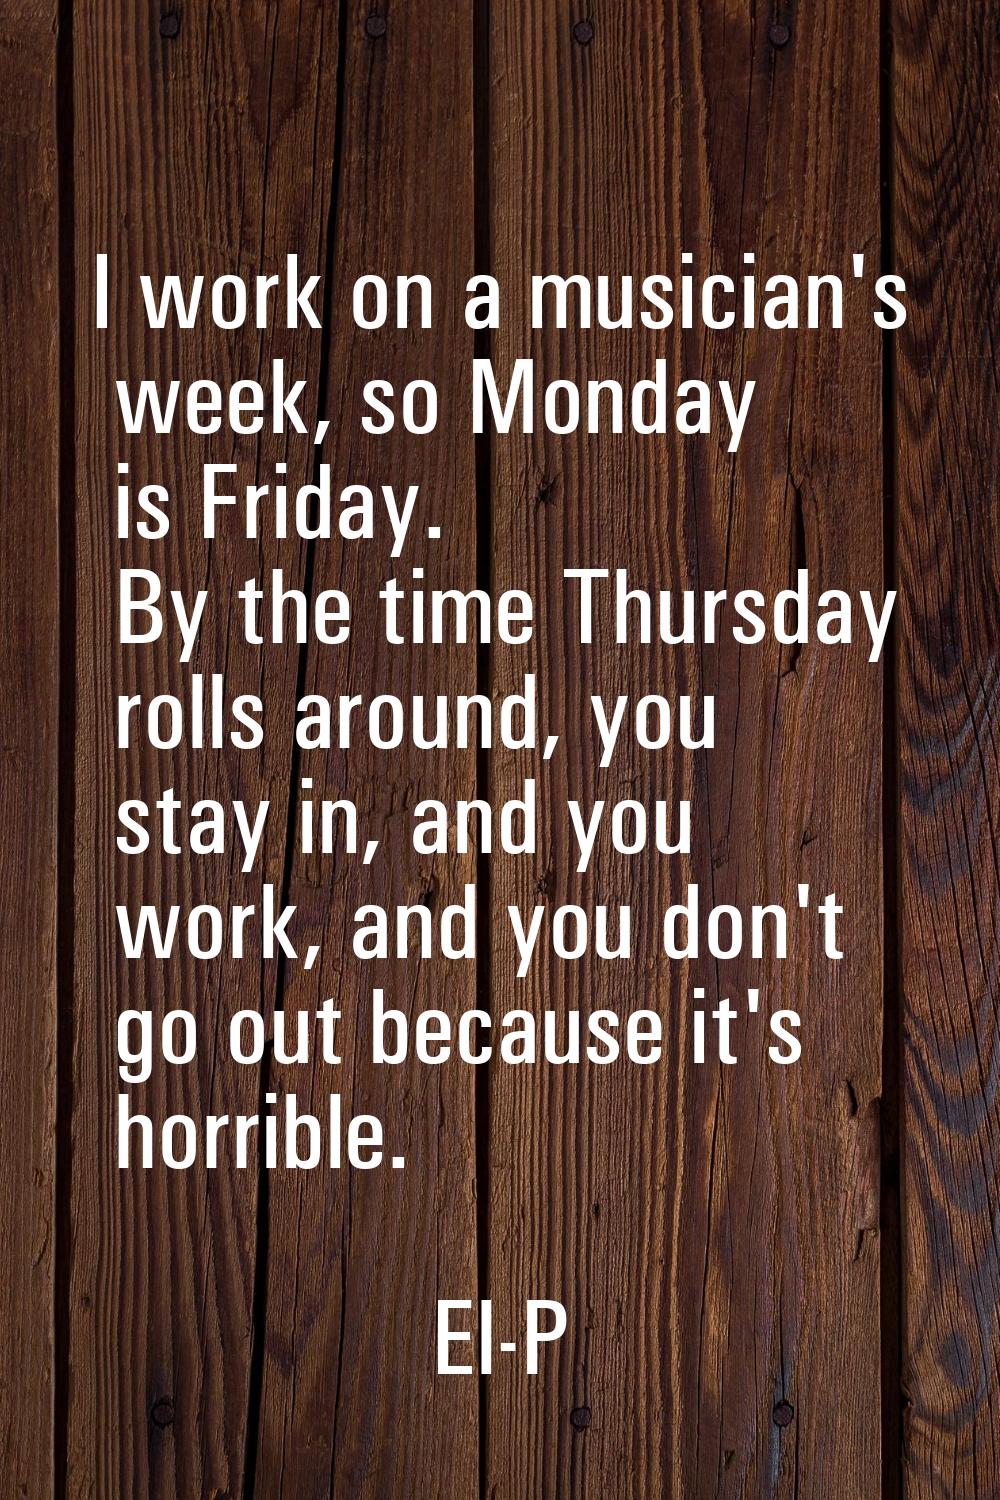 I work on a musician's week, so Monday is Friday. By the time Thursday rolls around, you stay in, a